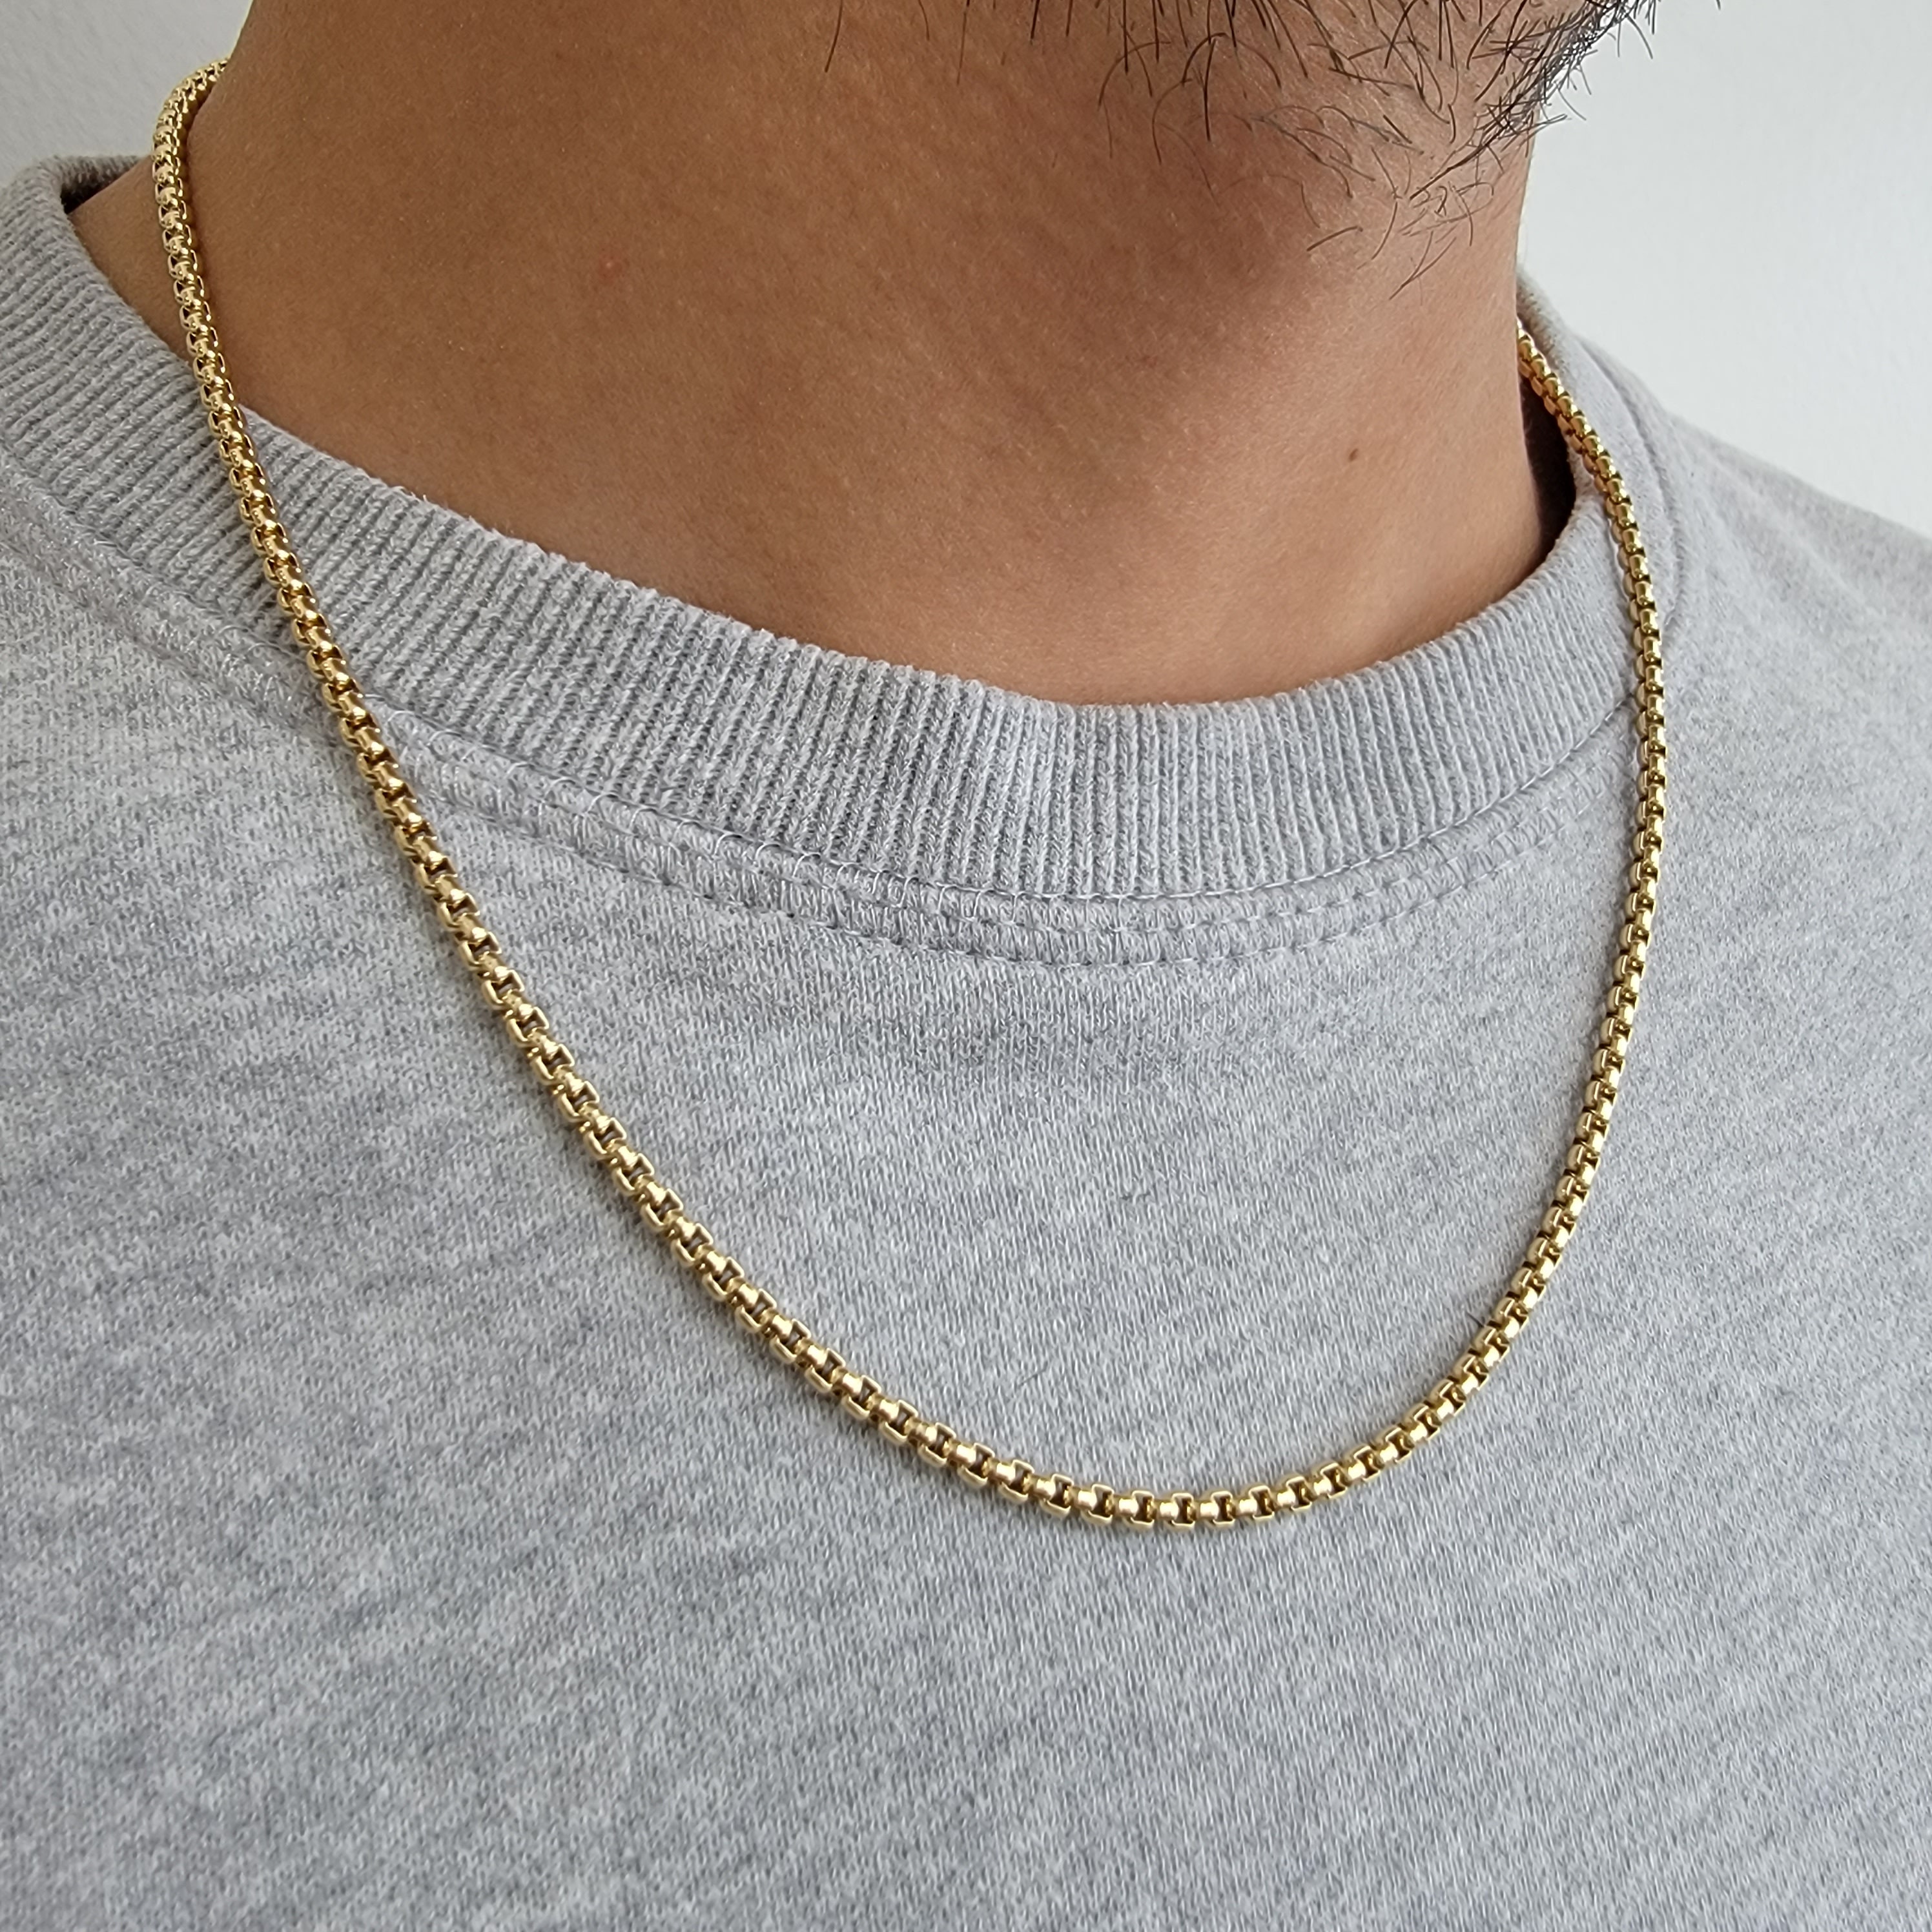 3mm Gold Round Box Link Stainless Steel Necklace Chain for Men | Etsy